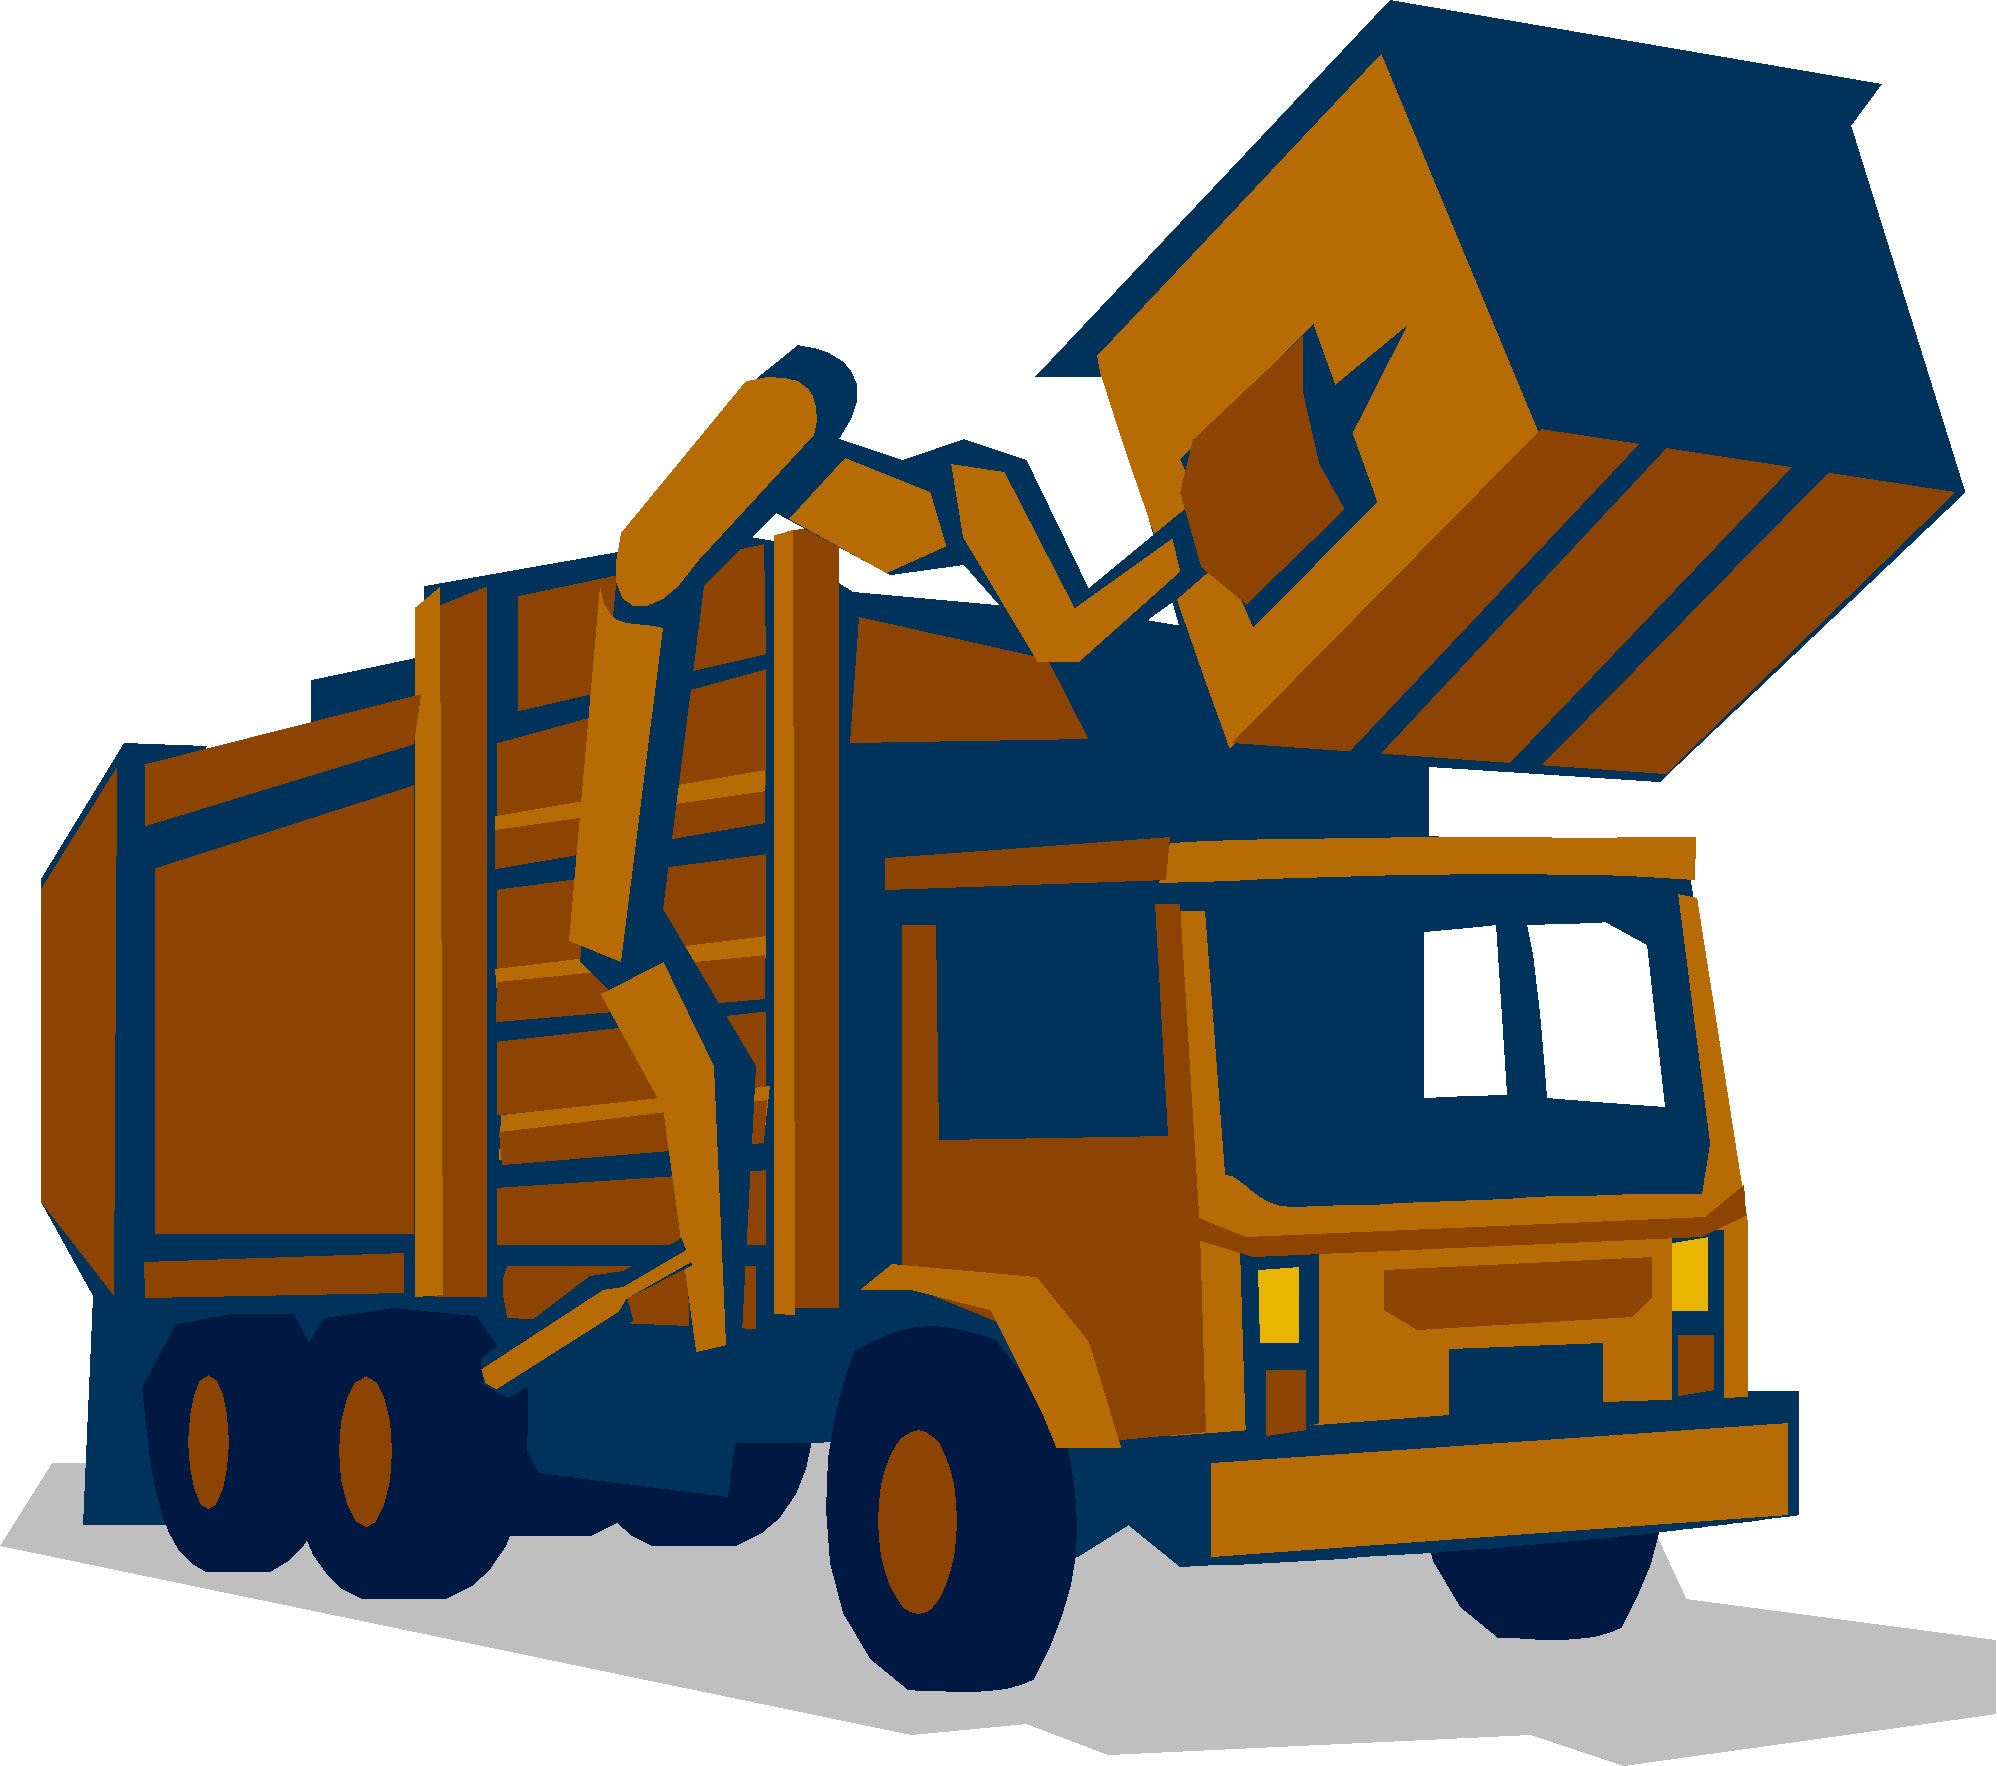 Garbage Truck Clipart - Cliparts.co